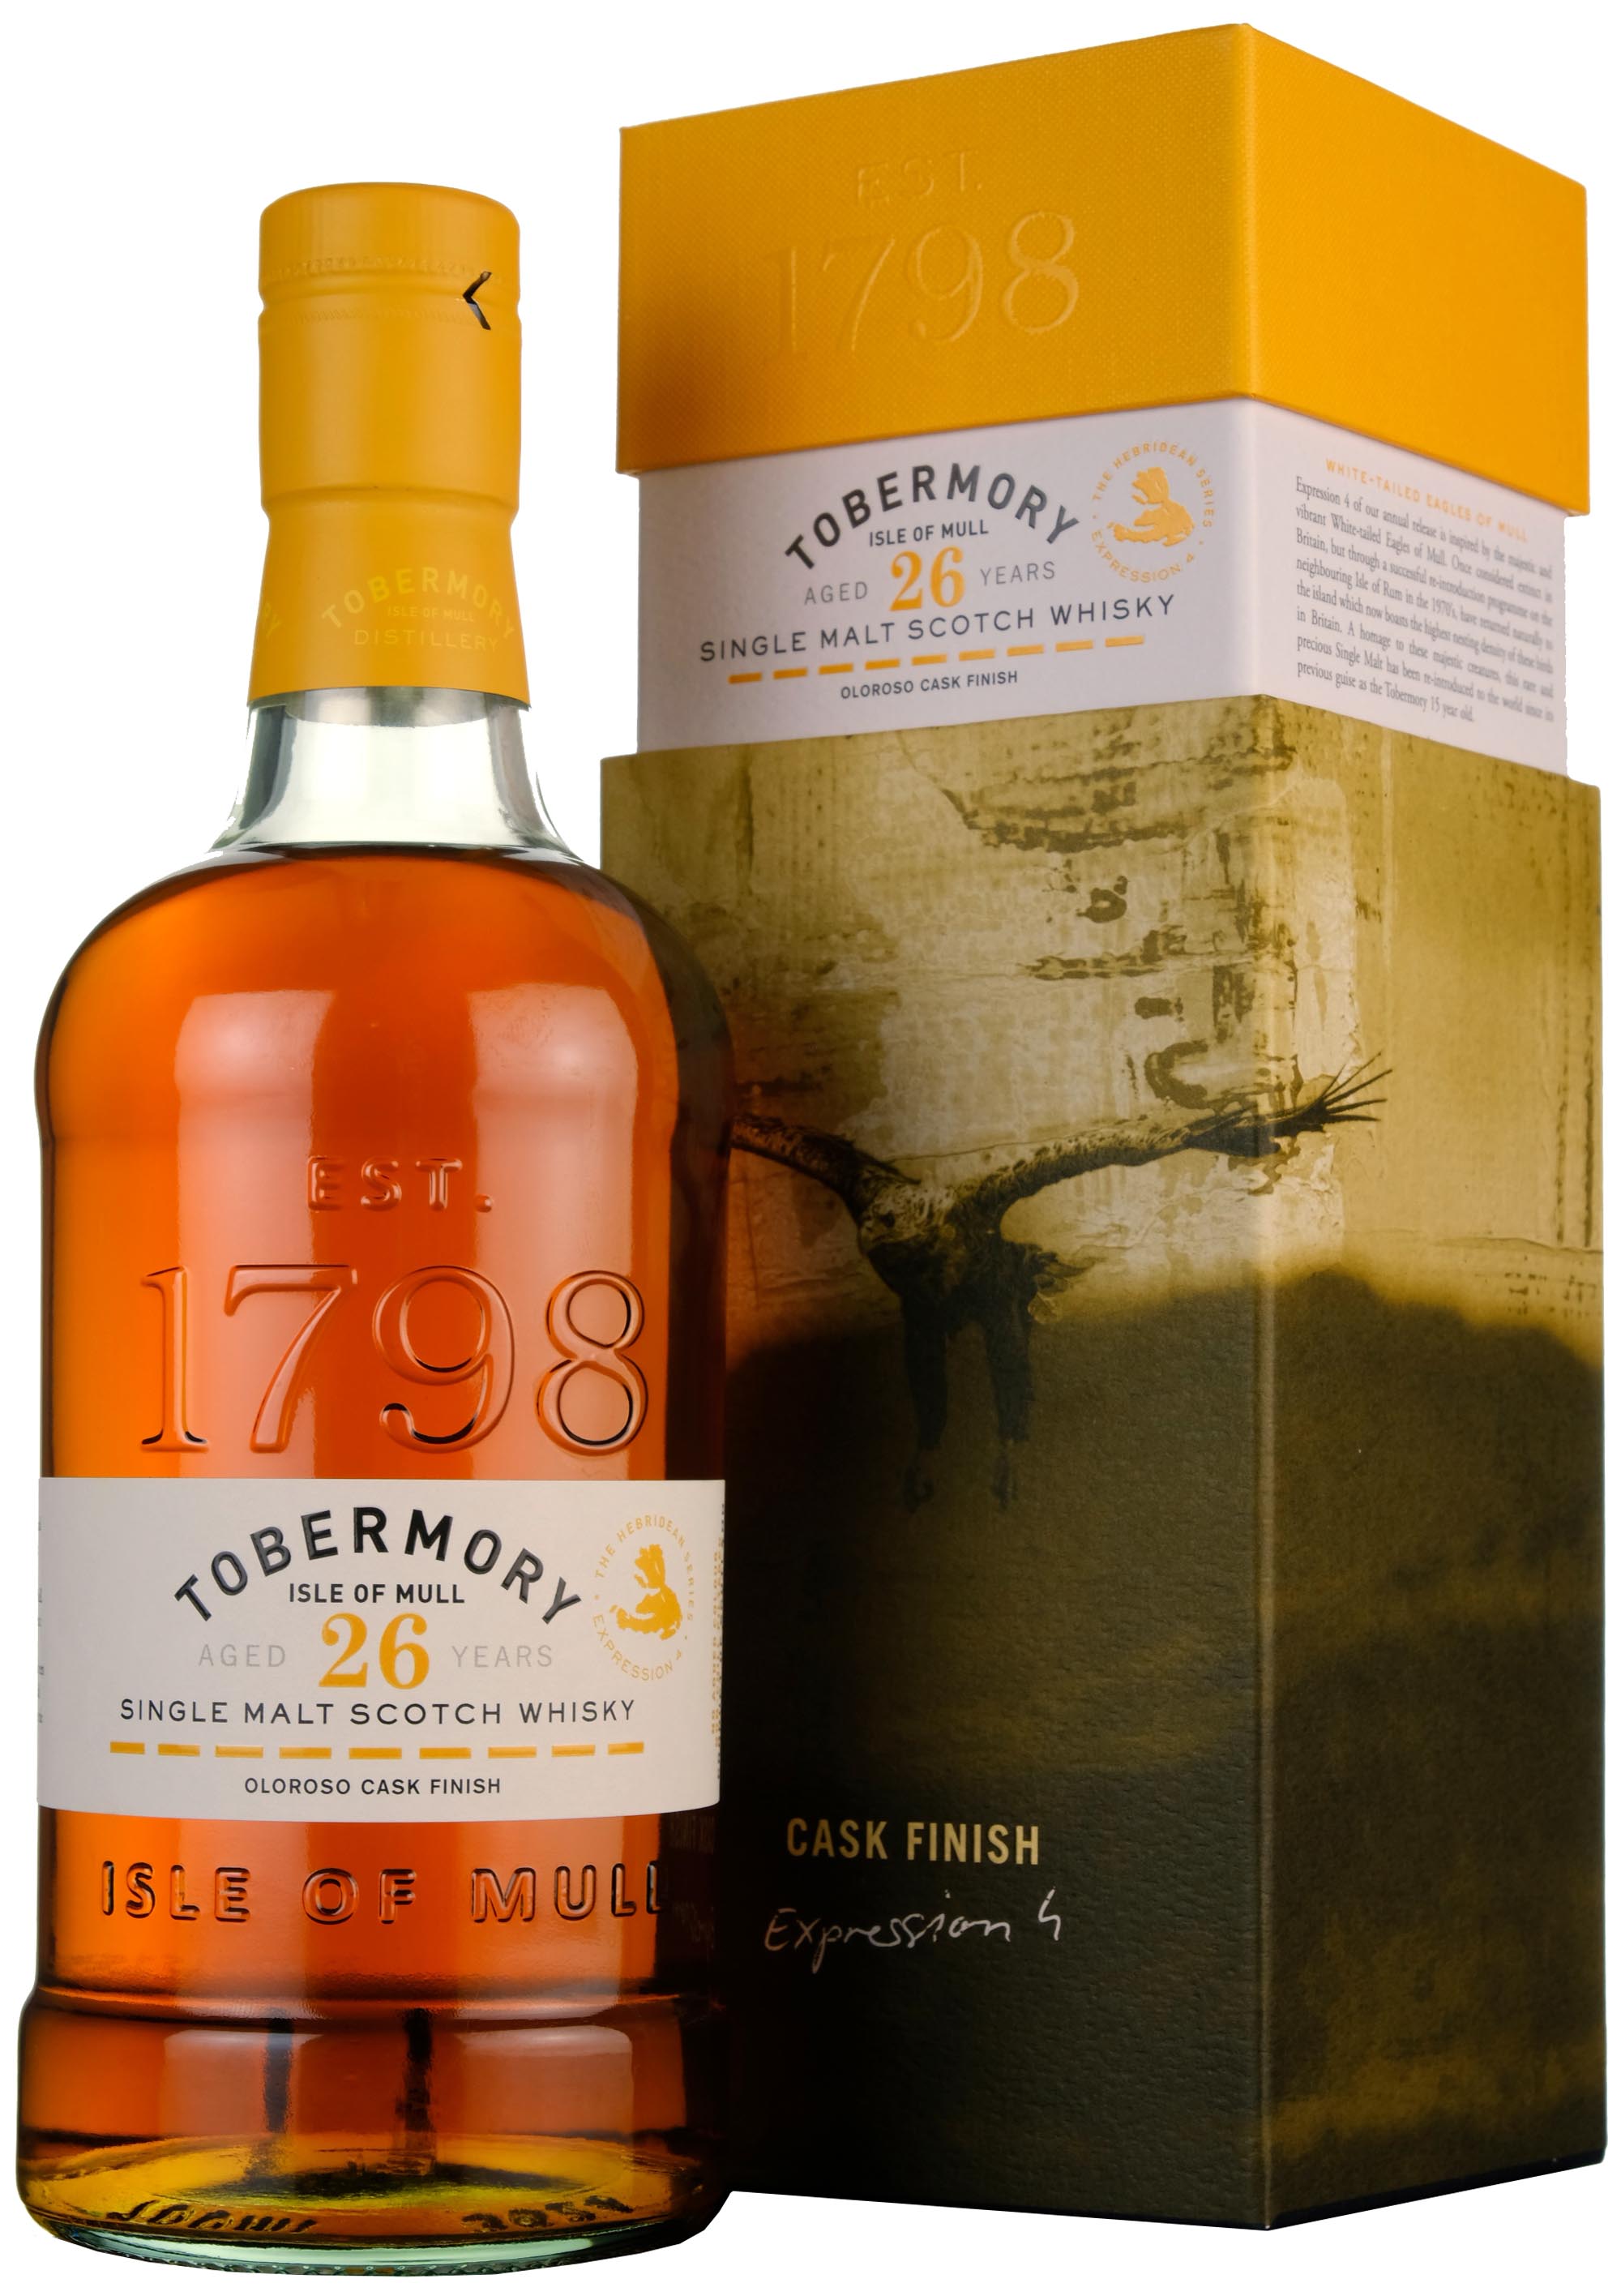 Tobermory 26 Year Old Expression 4 Oloroso Cask Finish